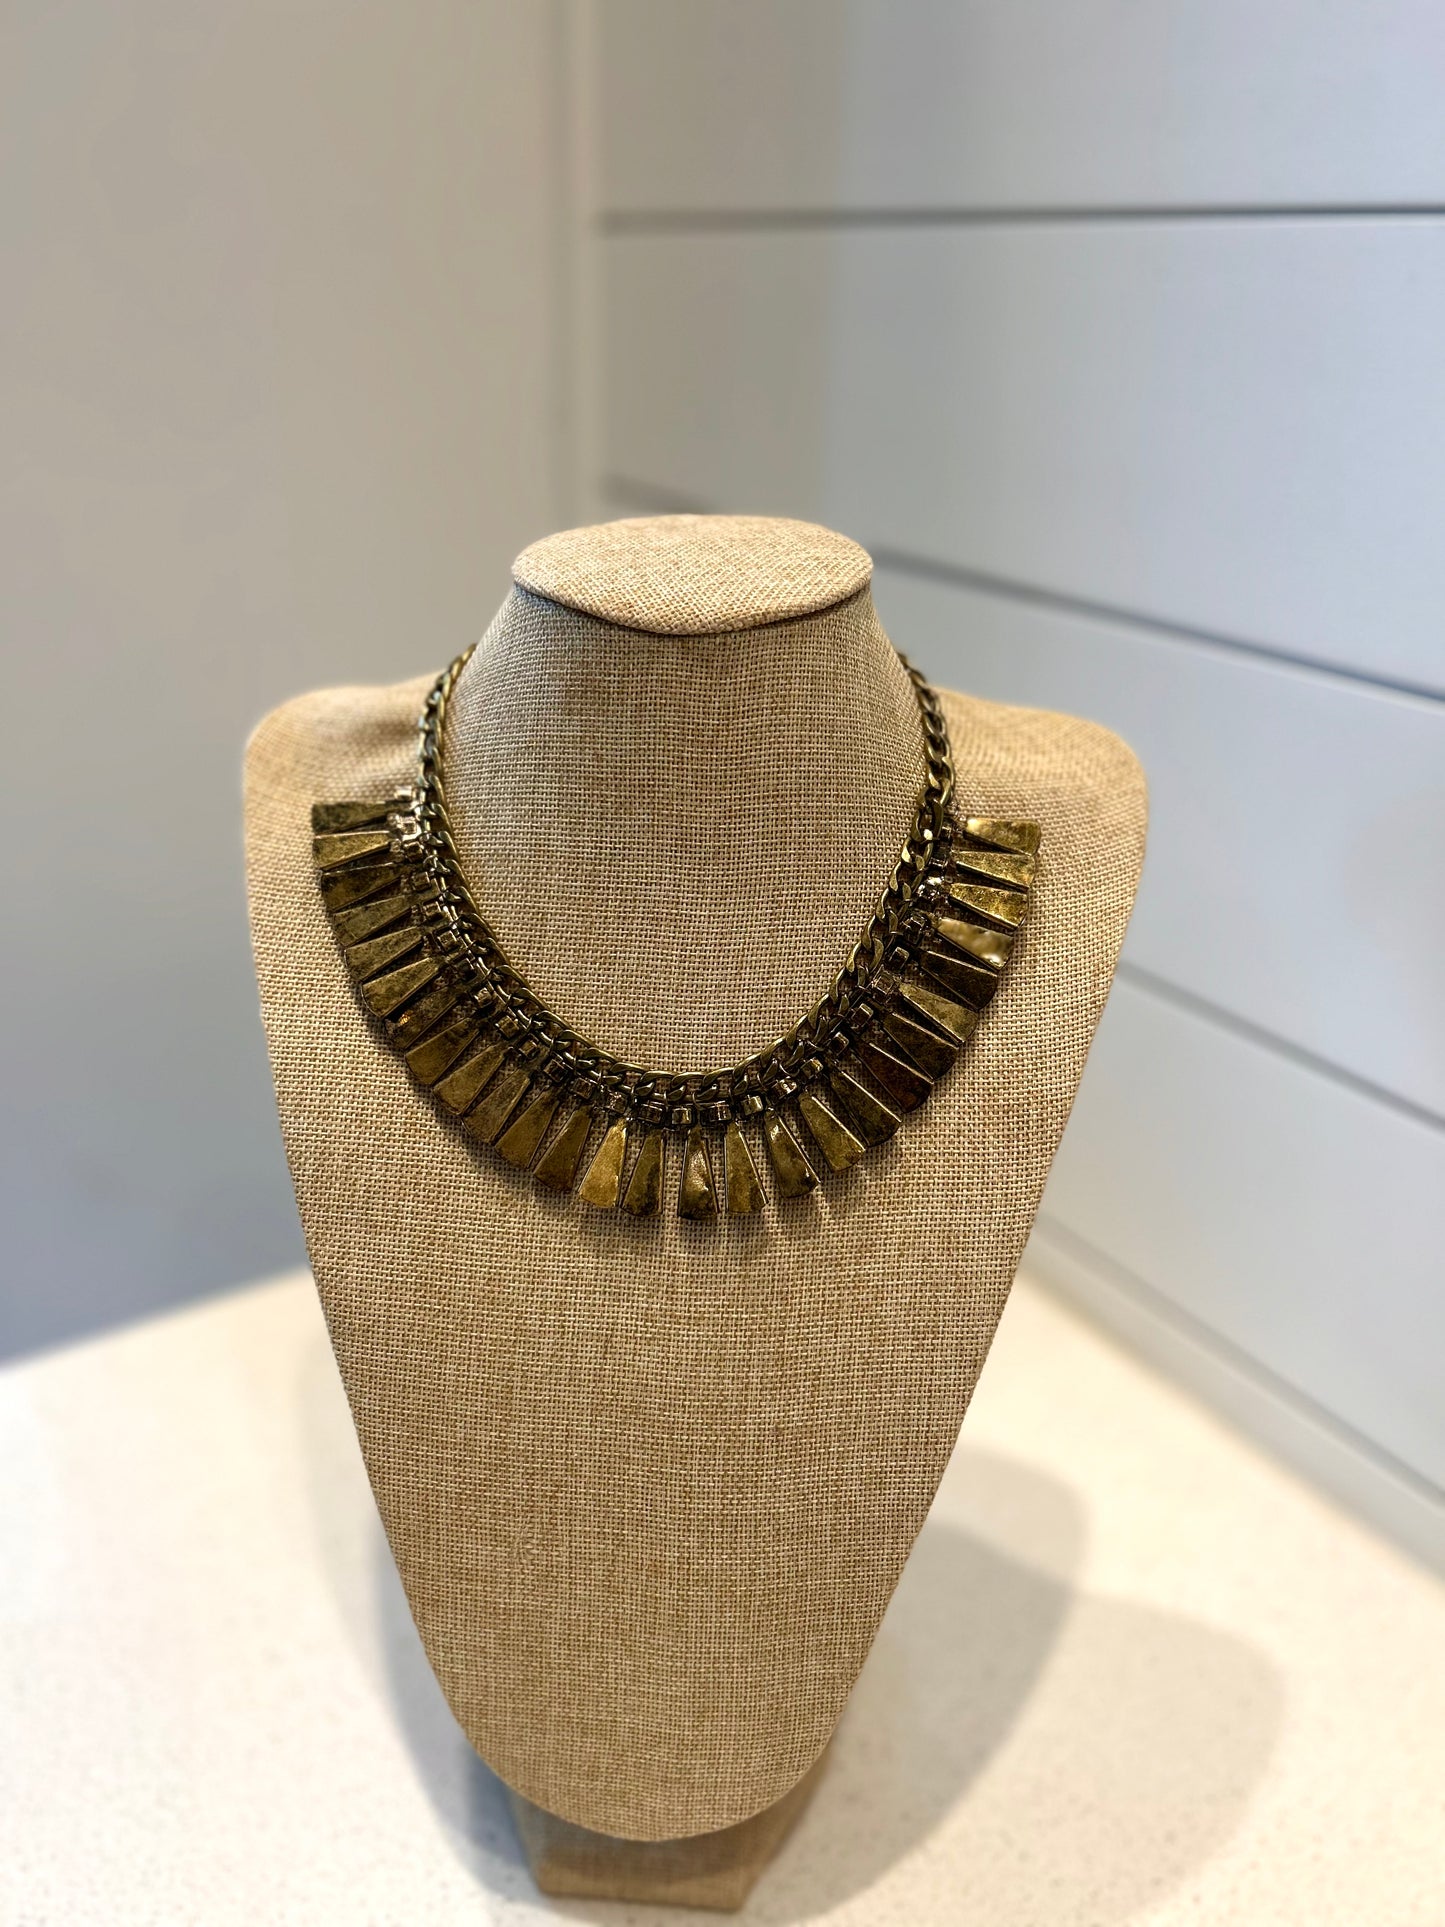 The Evelyn Necklace